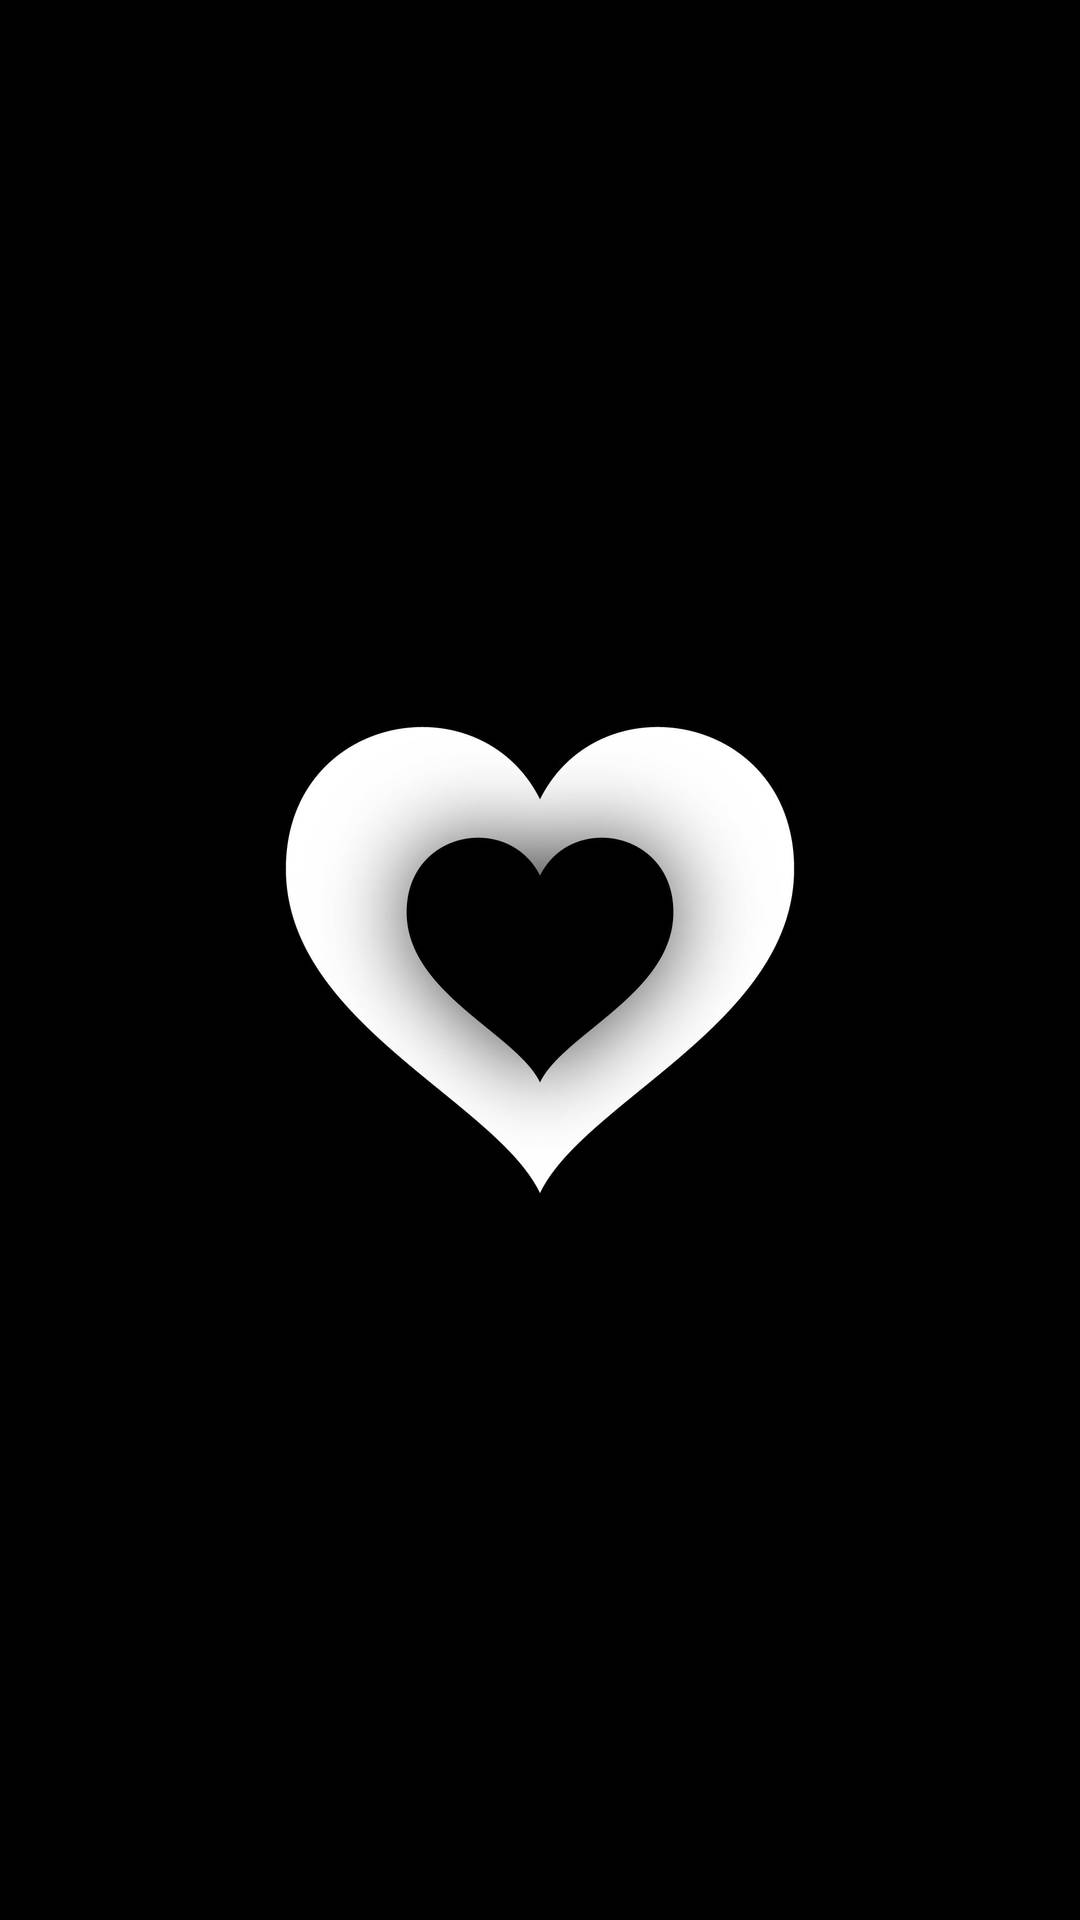 Double Black And White Heart Background